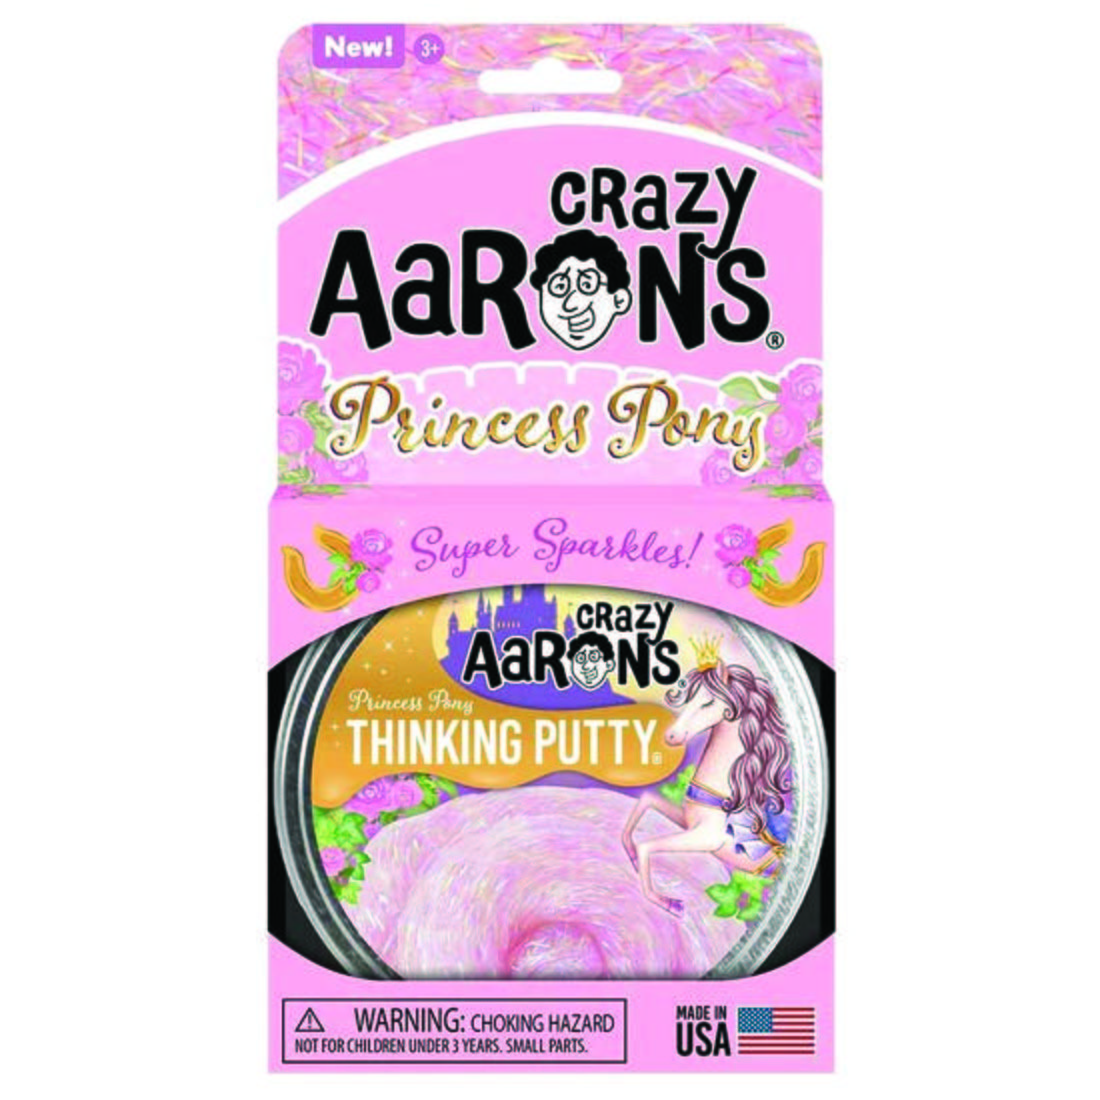 Package of Princess Pony Thinking Putty with tin